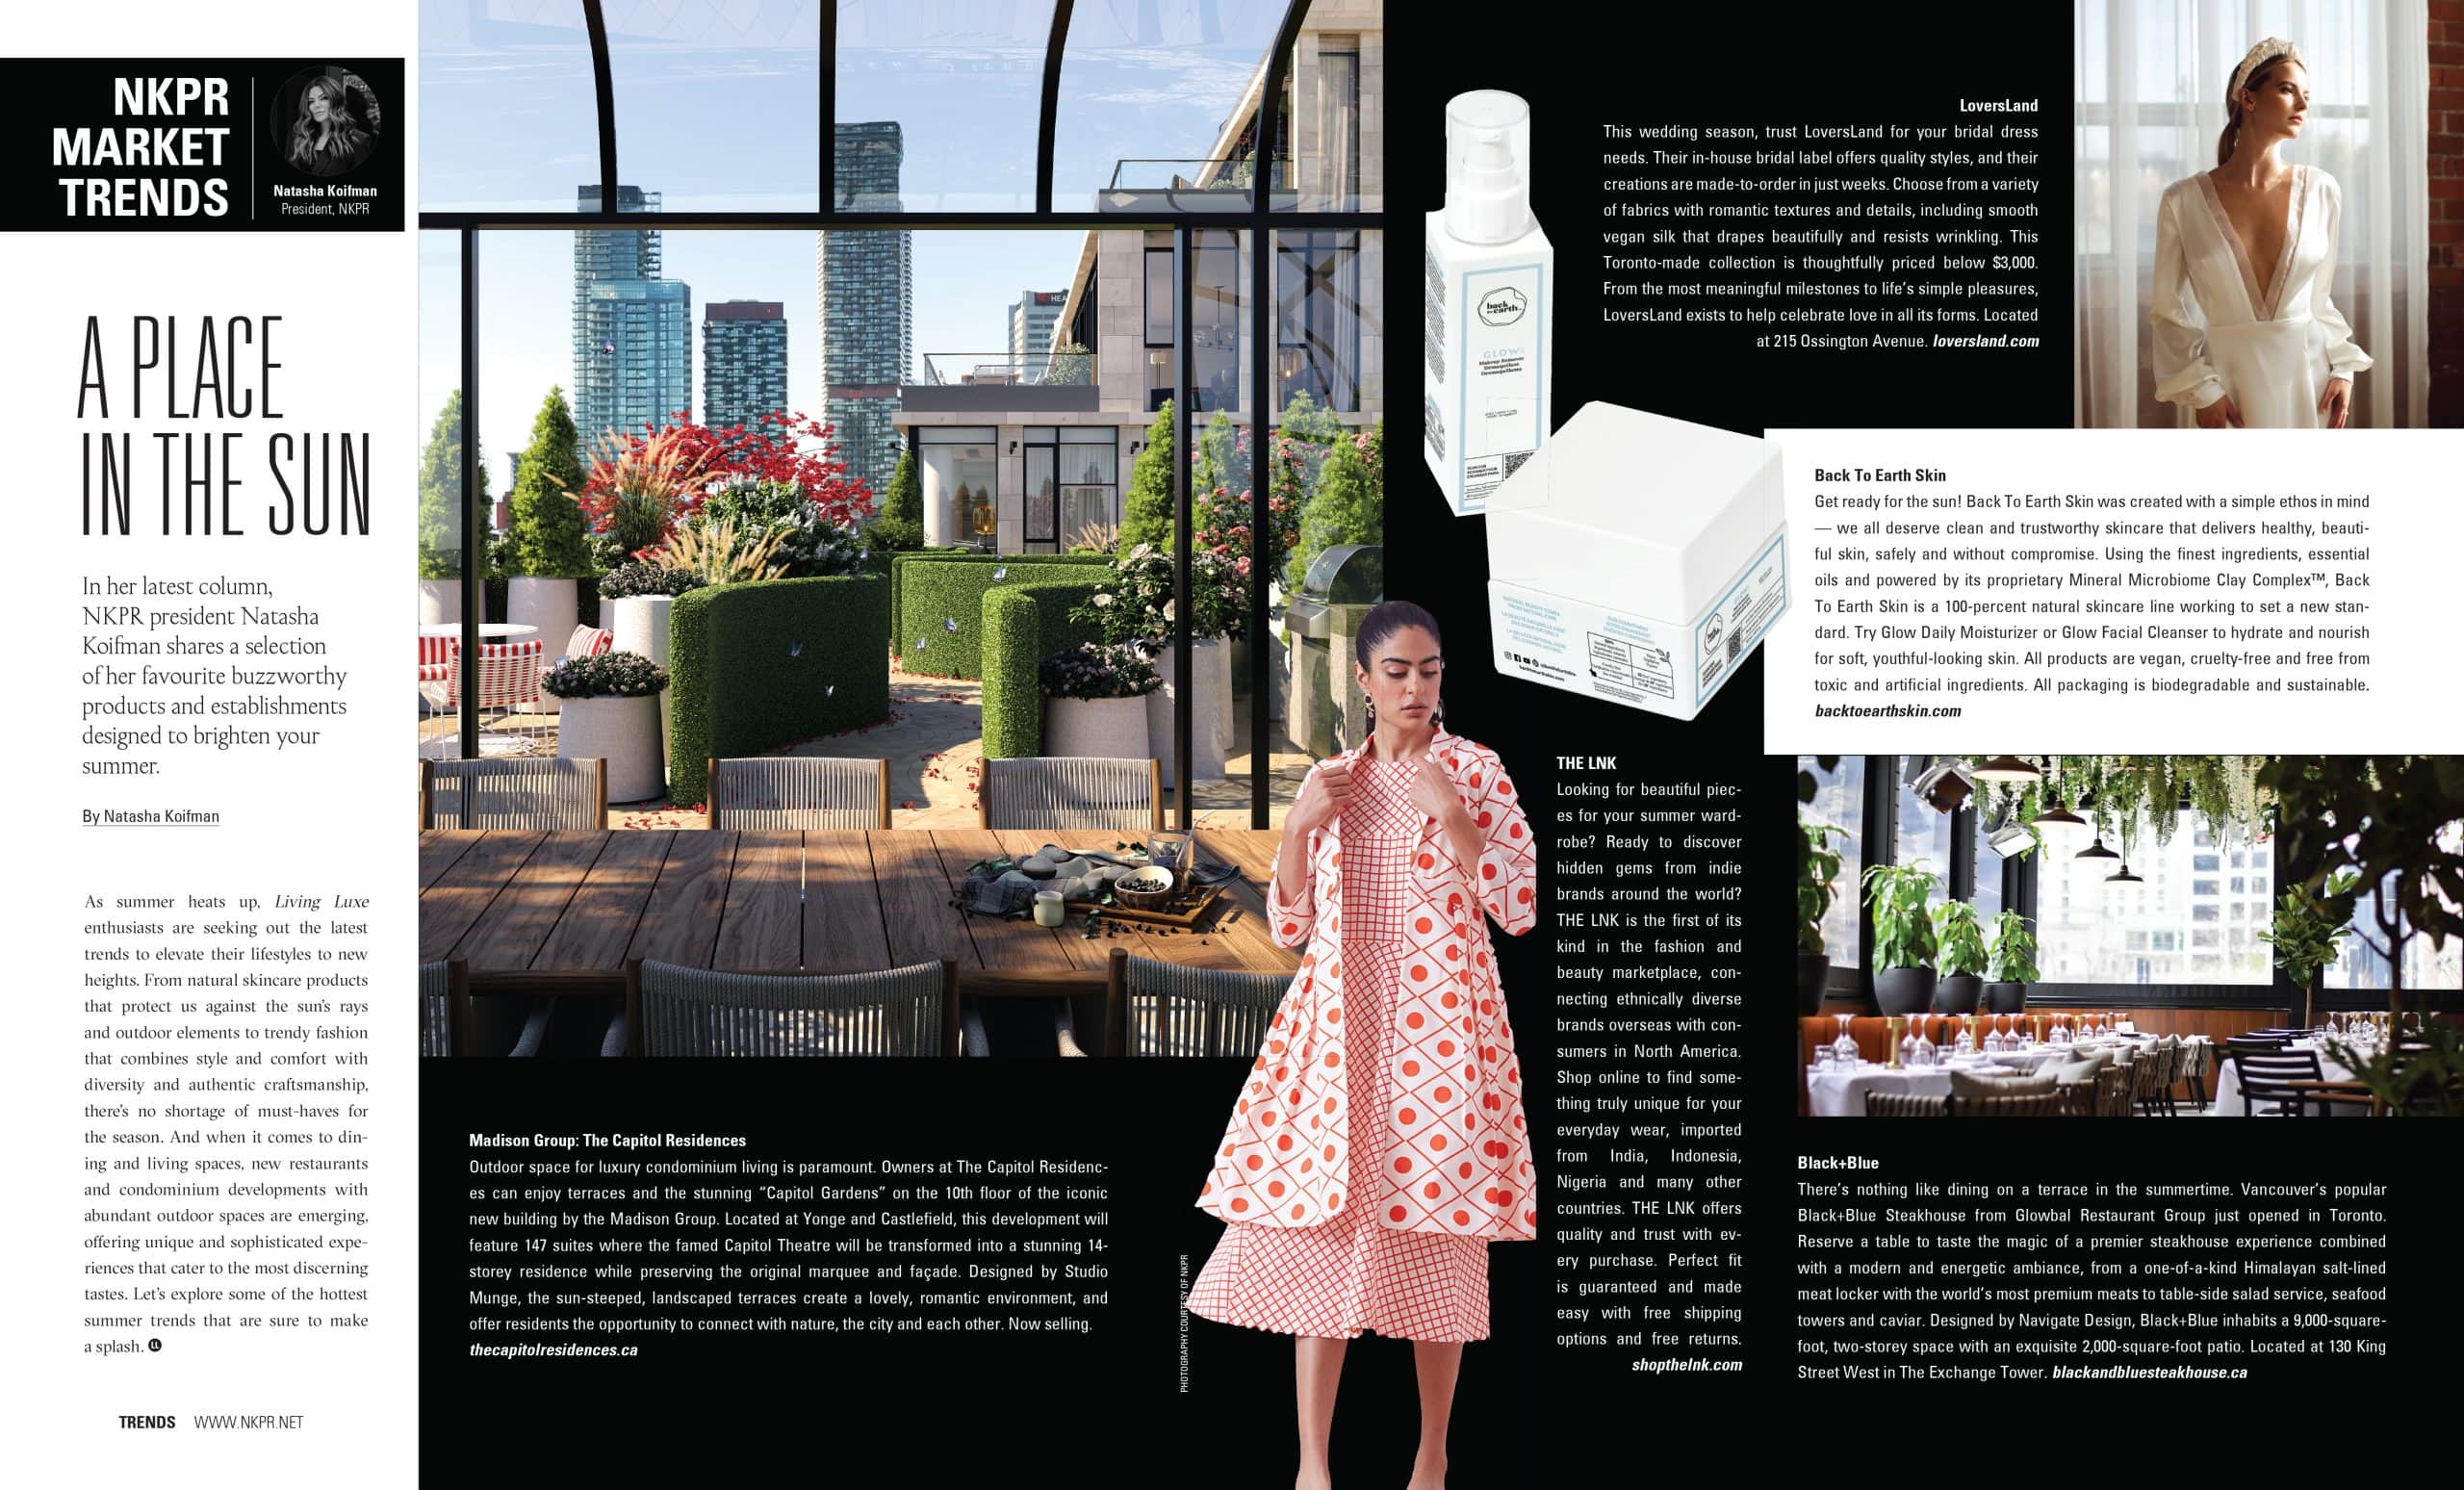 NKPR market trends page in the latest edition of Living Luxe Magazine.